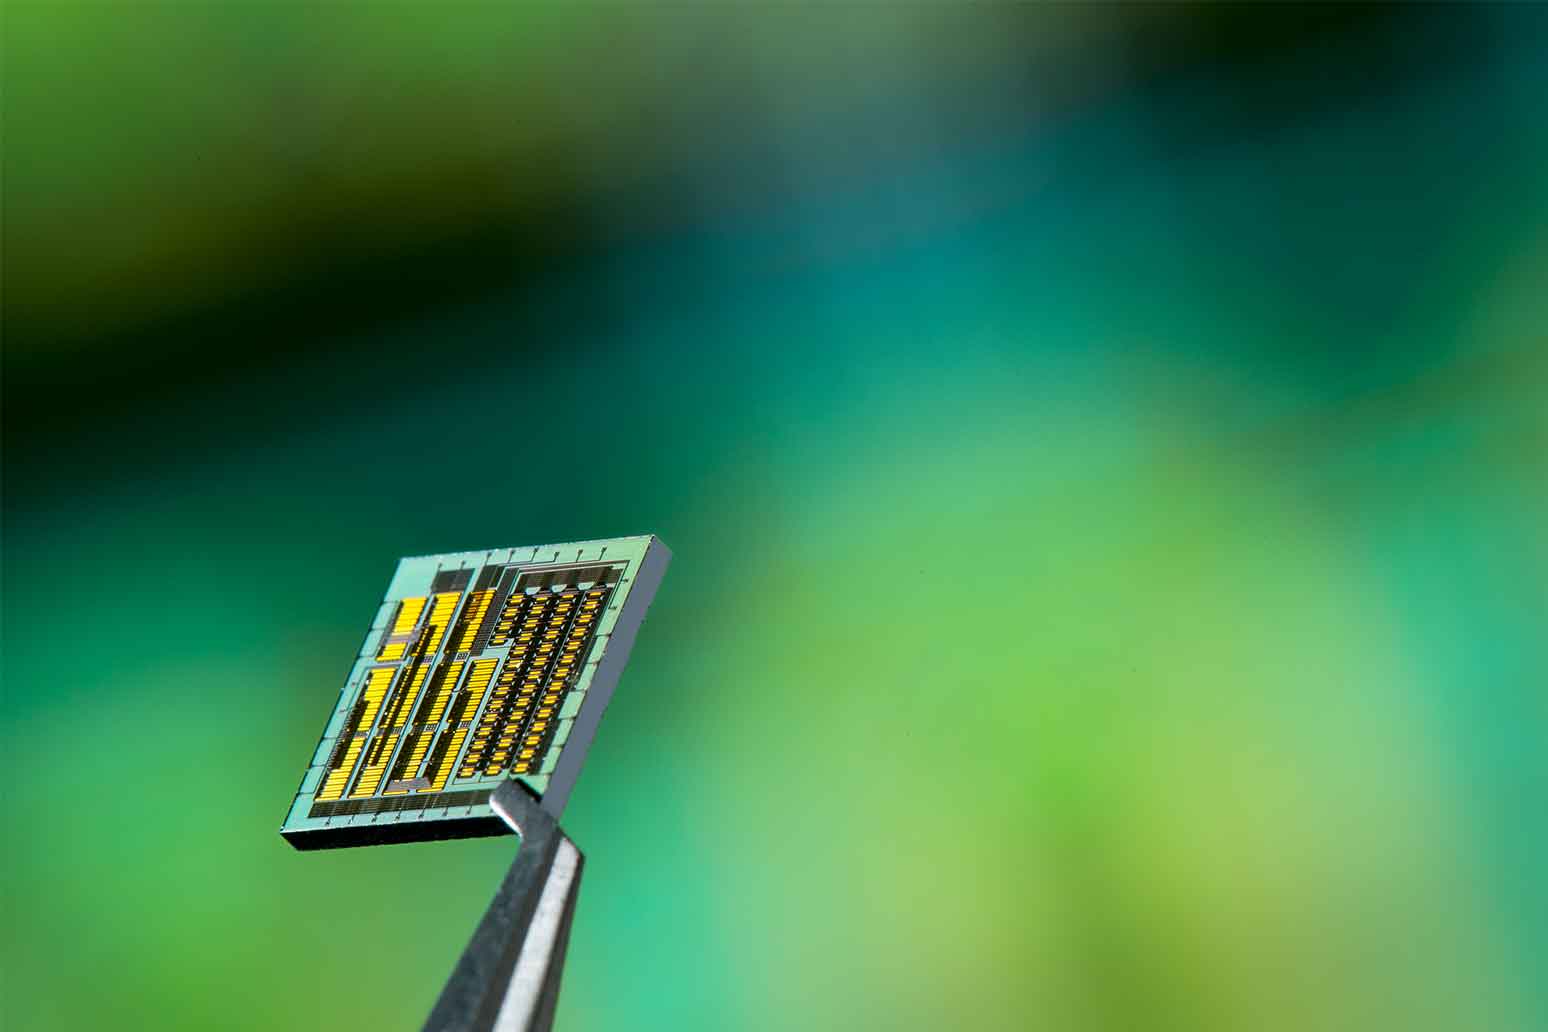 Micropump driver ICs realized with 0.18 µm high voltage process